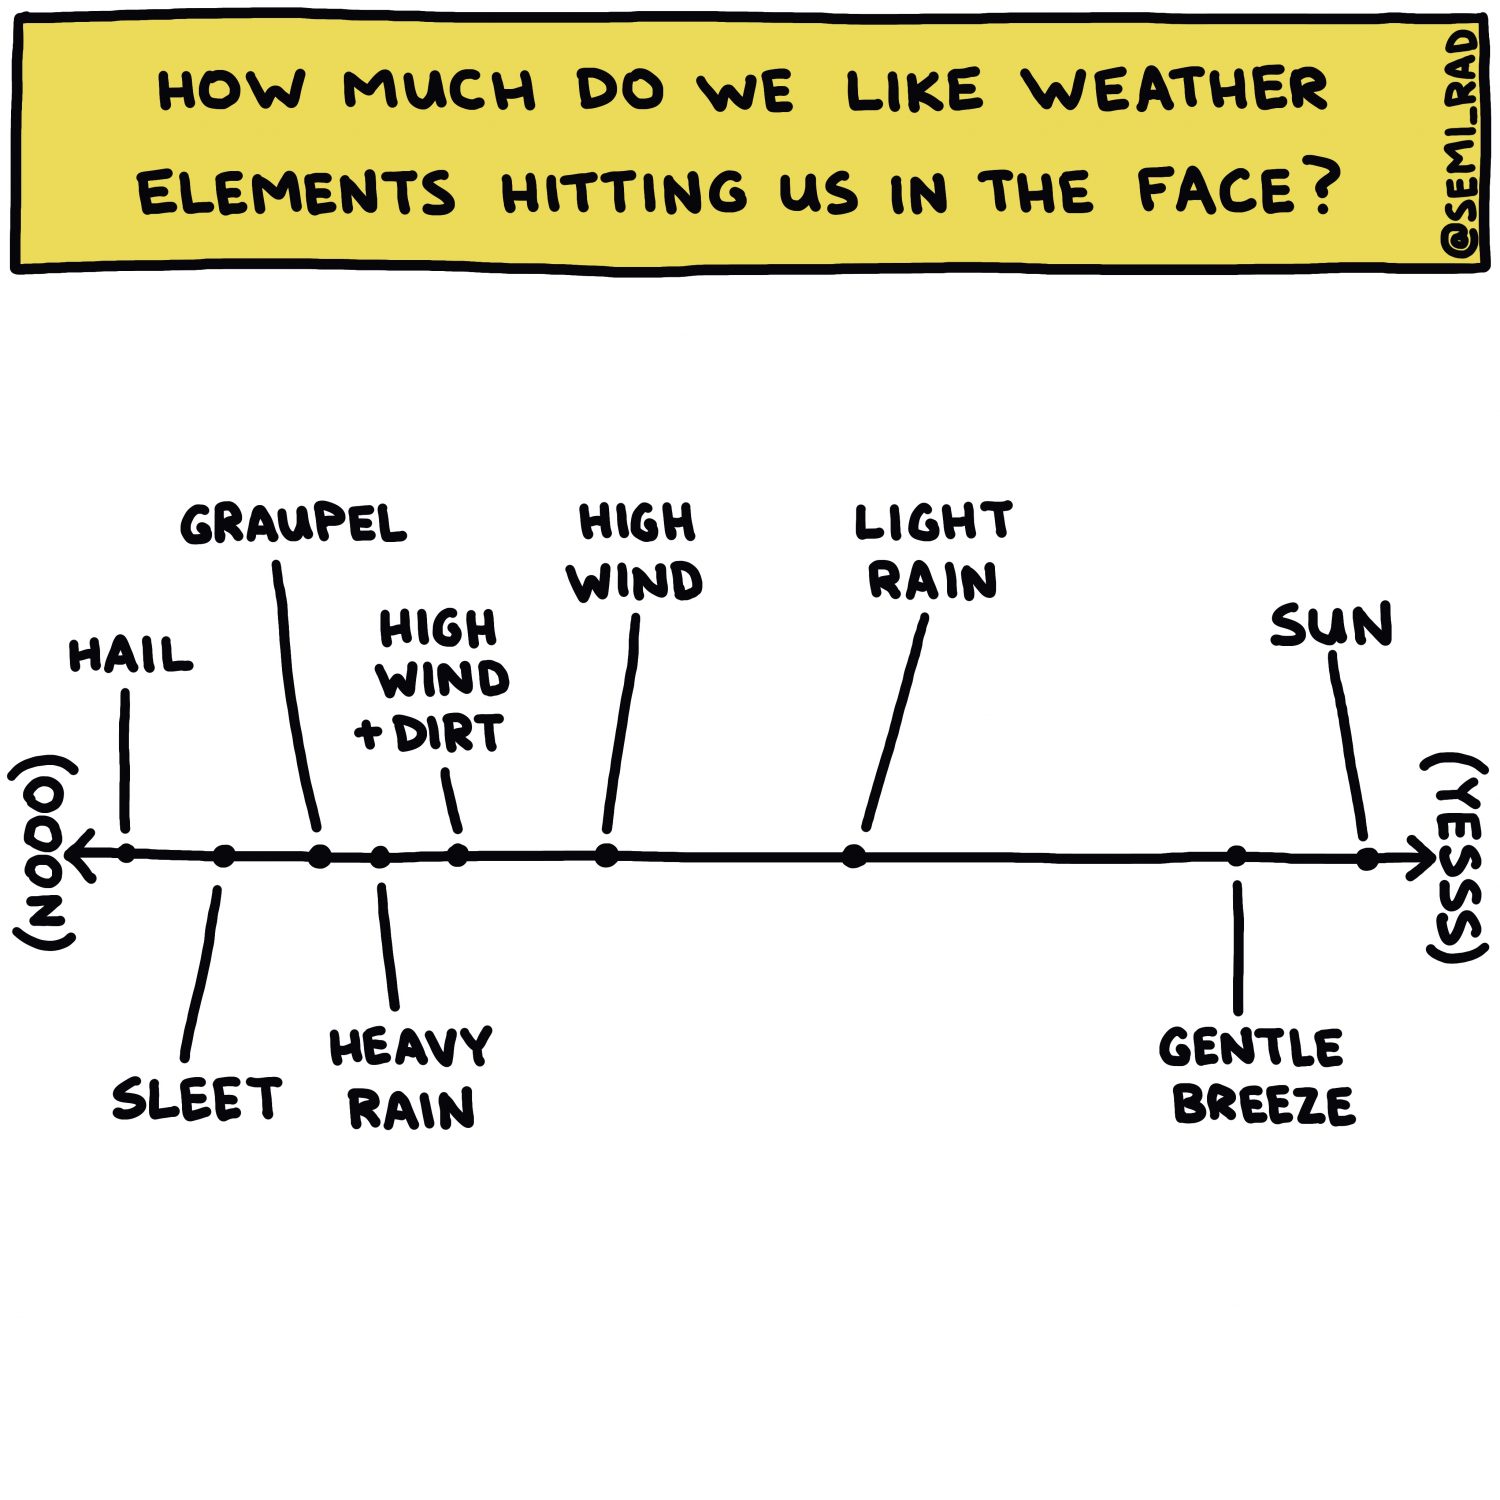 semi-rad chart: how much do we like weather elements hitting us in the face? 